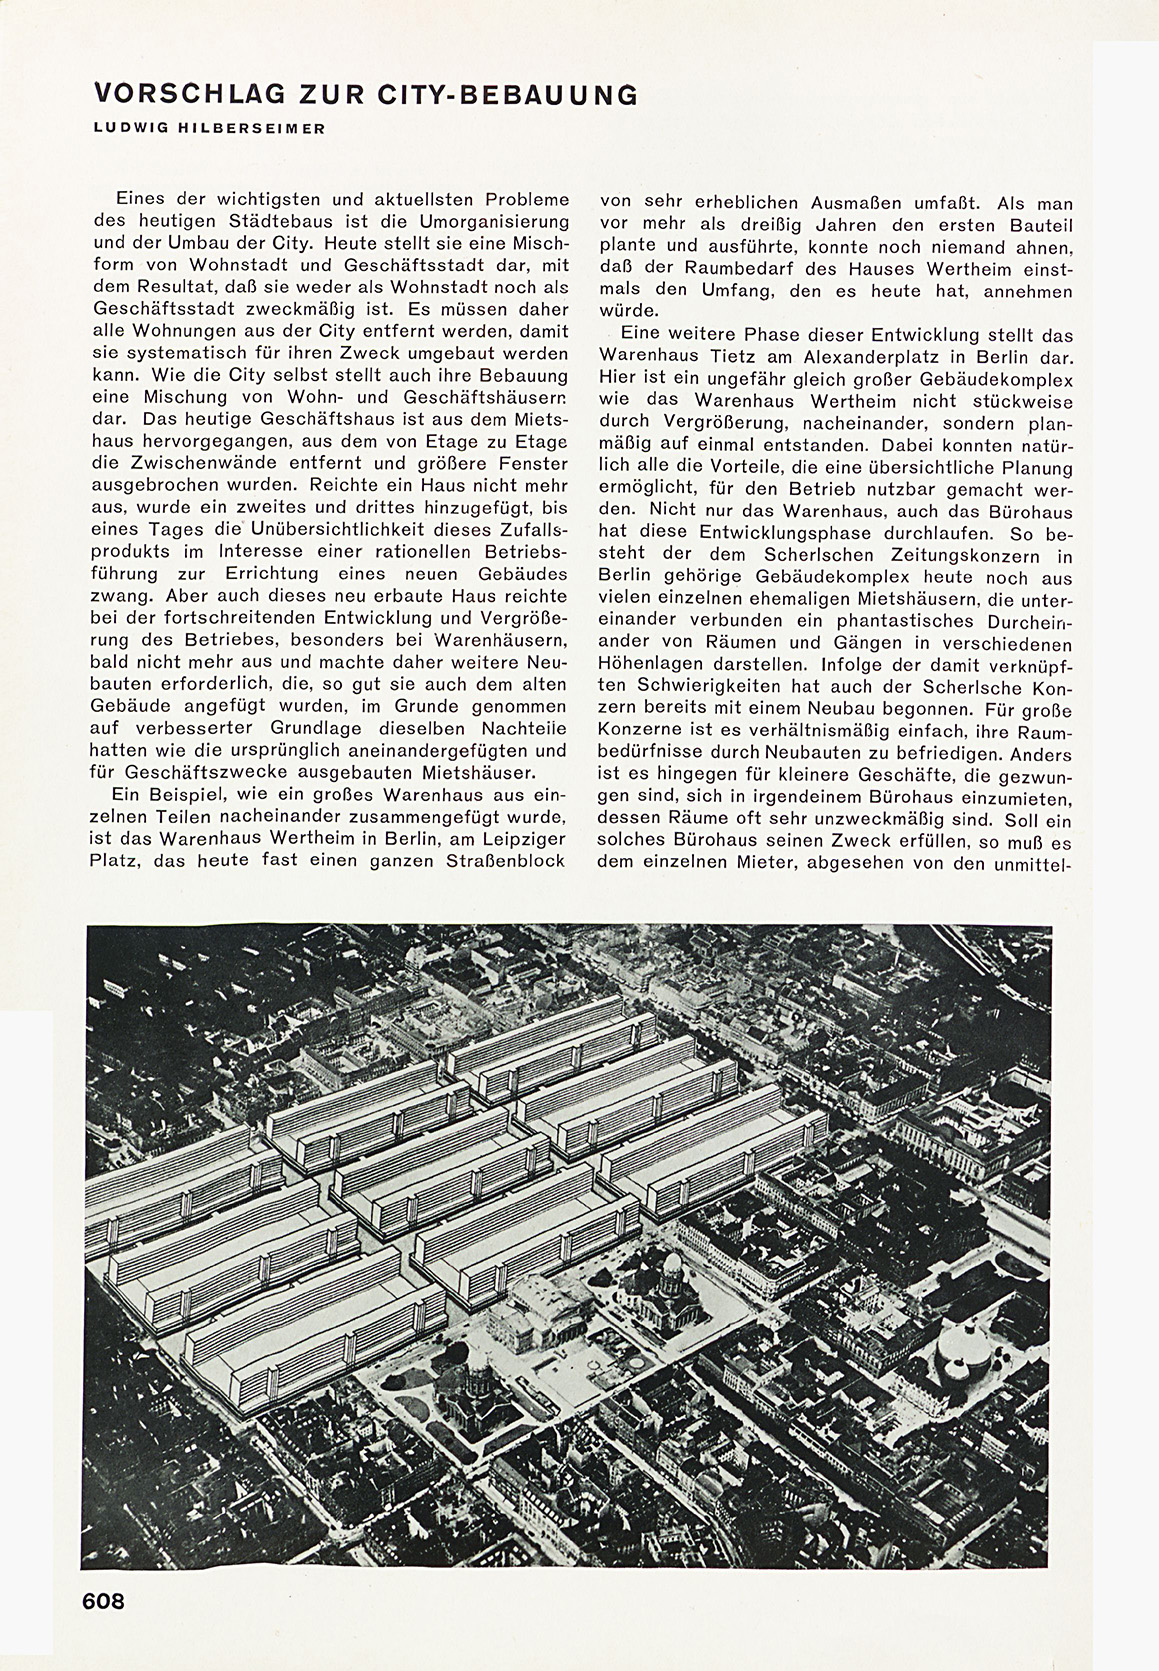 Proposal for a new city centre of Berlin by Ludwig Hilberseimer (1930).